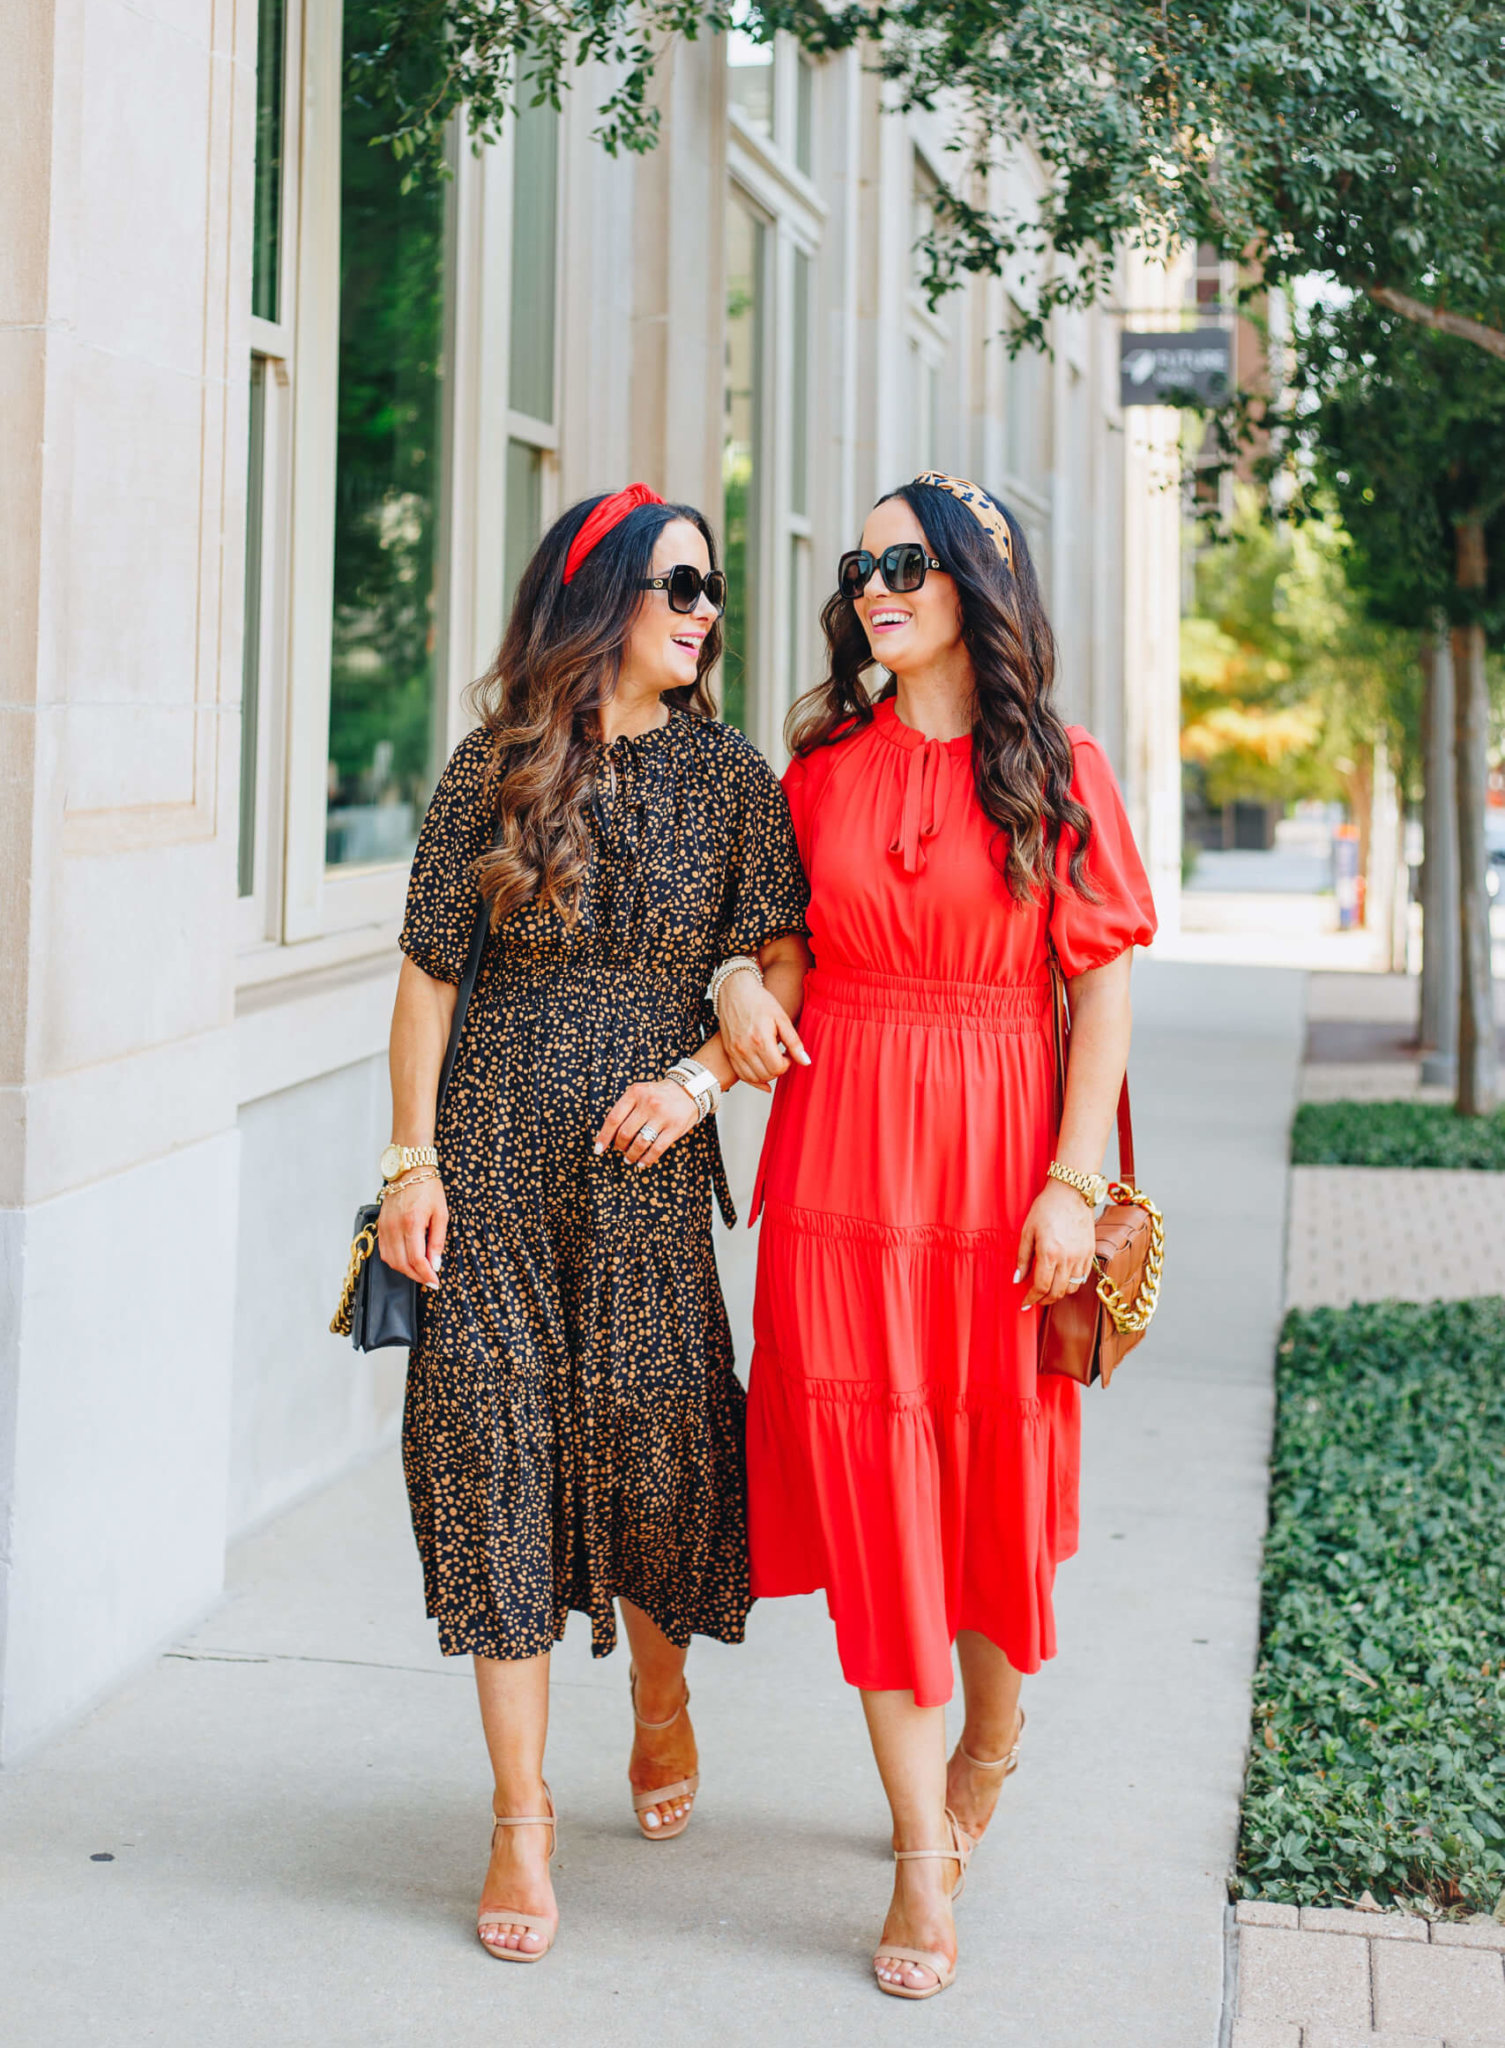 Favorite Fall Dresses Under $40 - The Double Take Girls